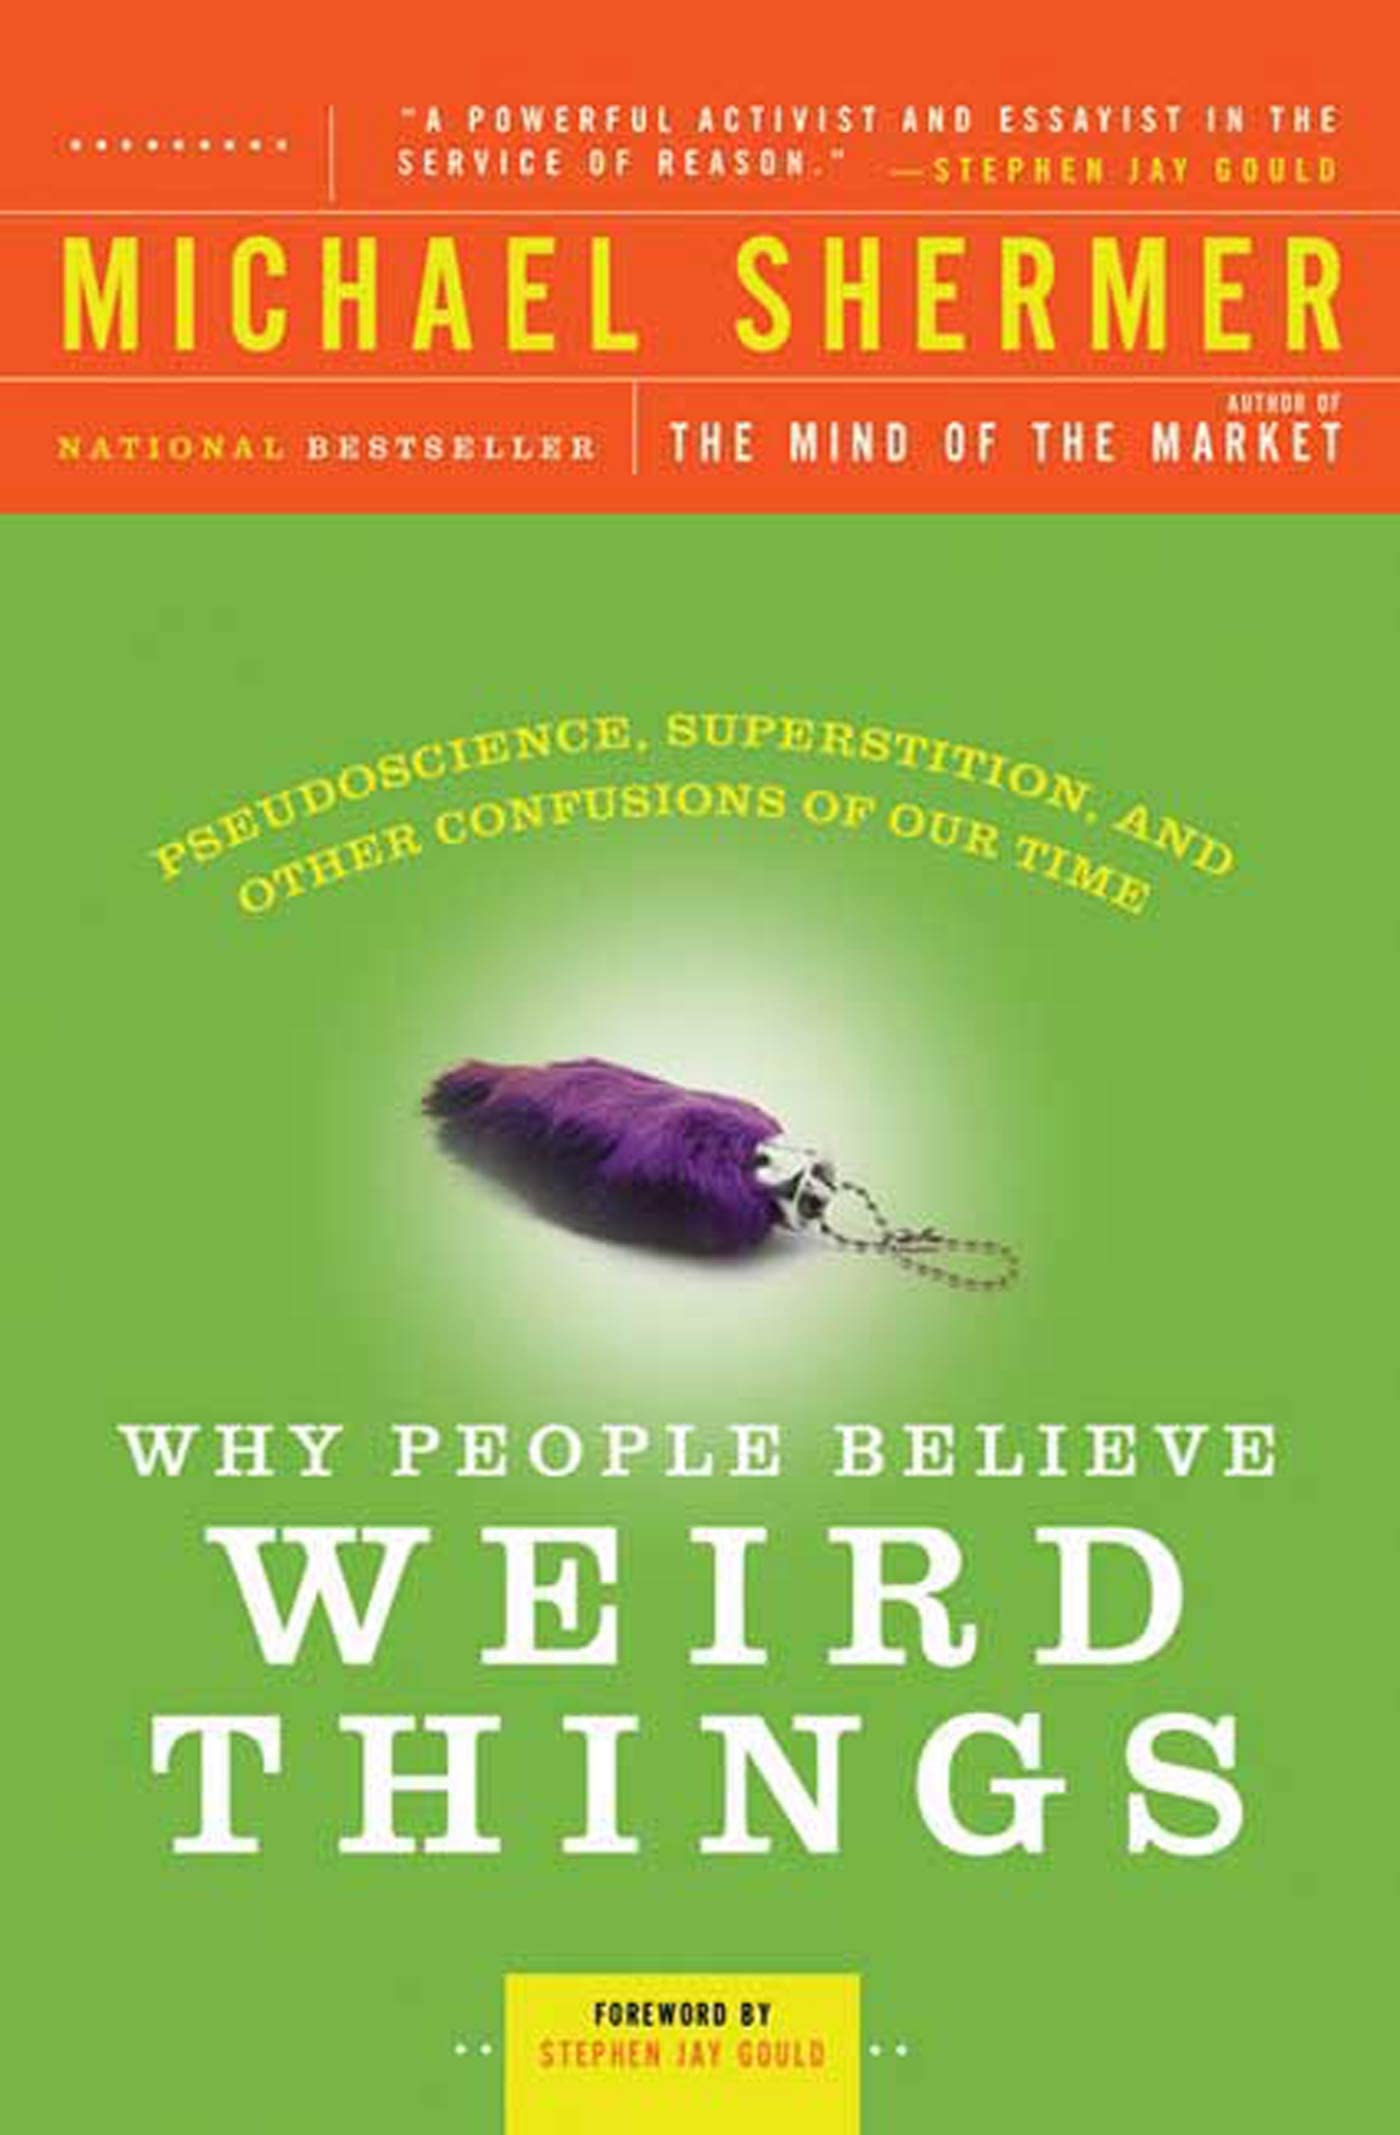 Why People Believe Weird Things Pseudoscience Superstition and Other Confusions of Our Time